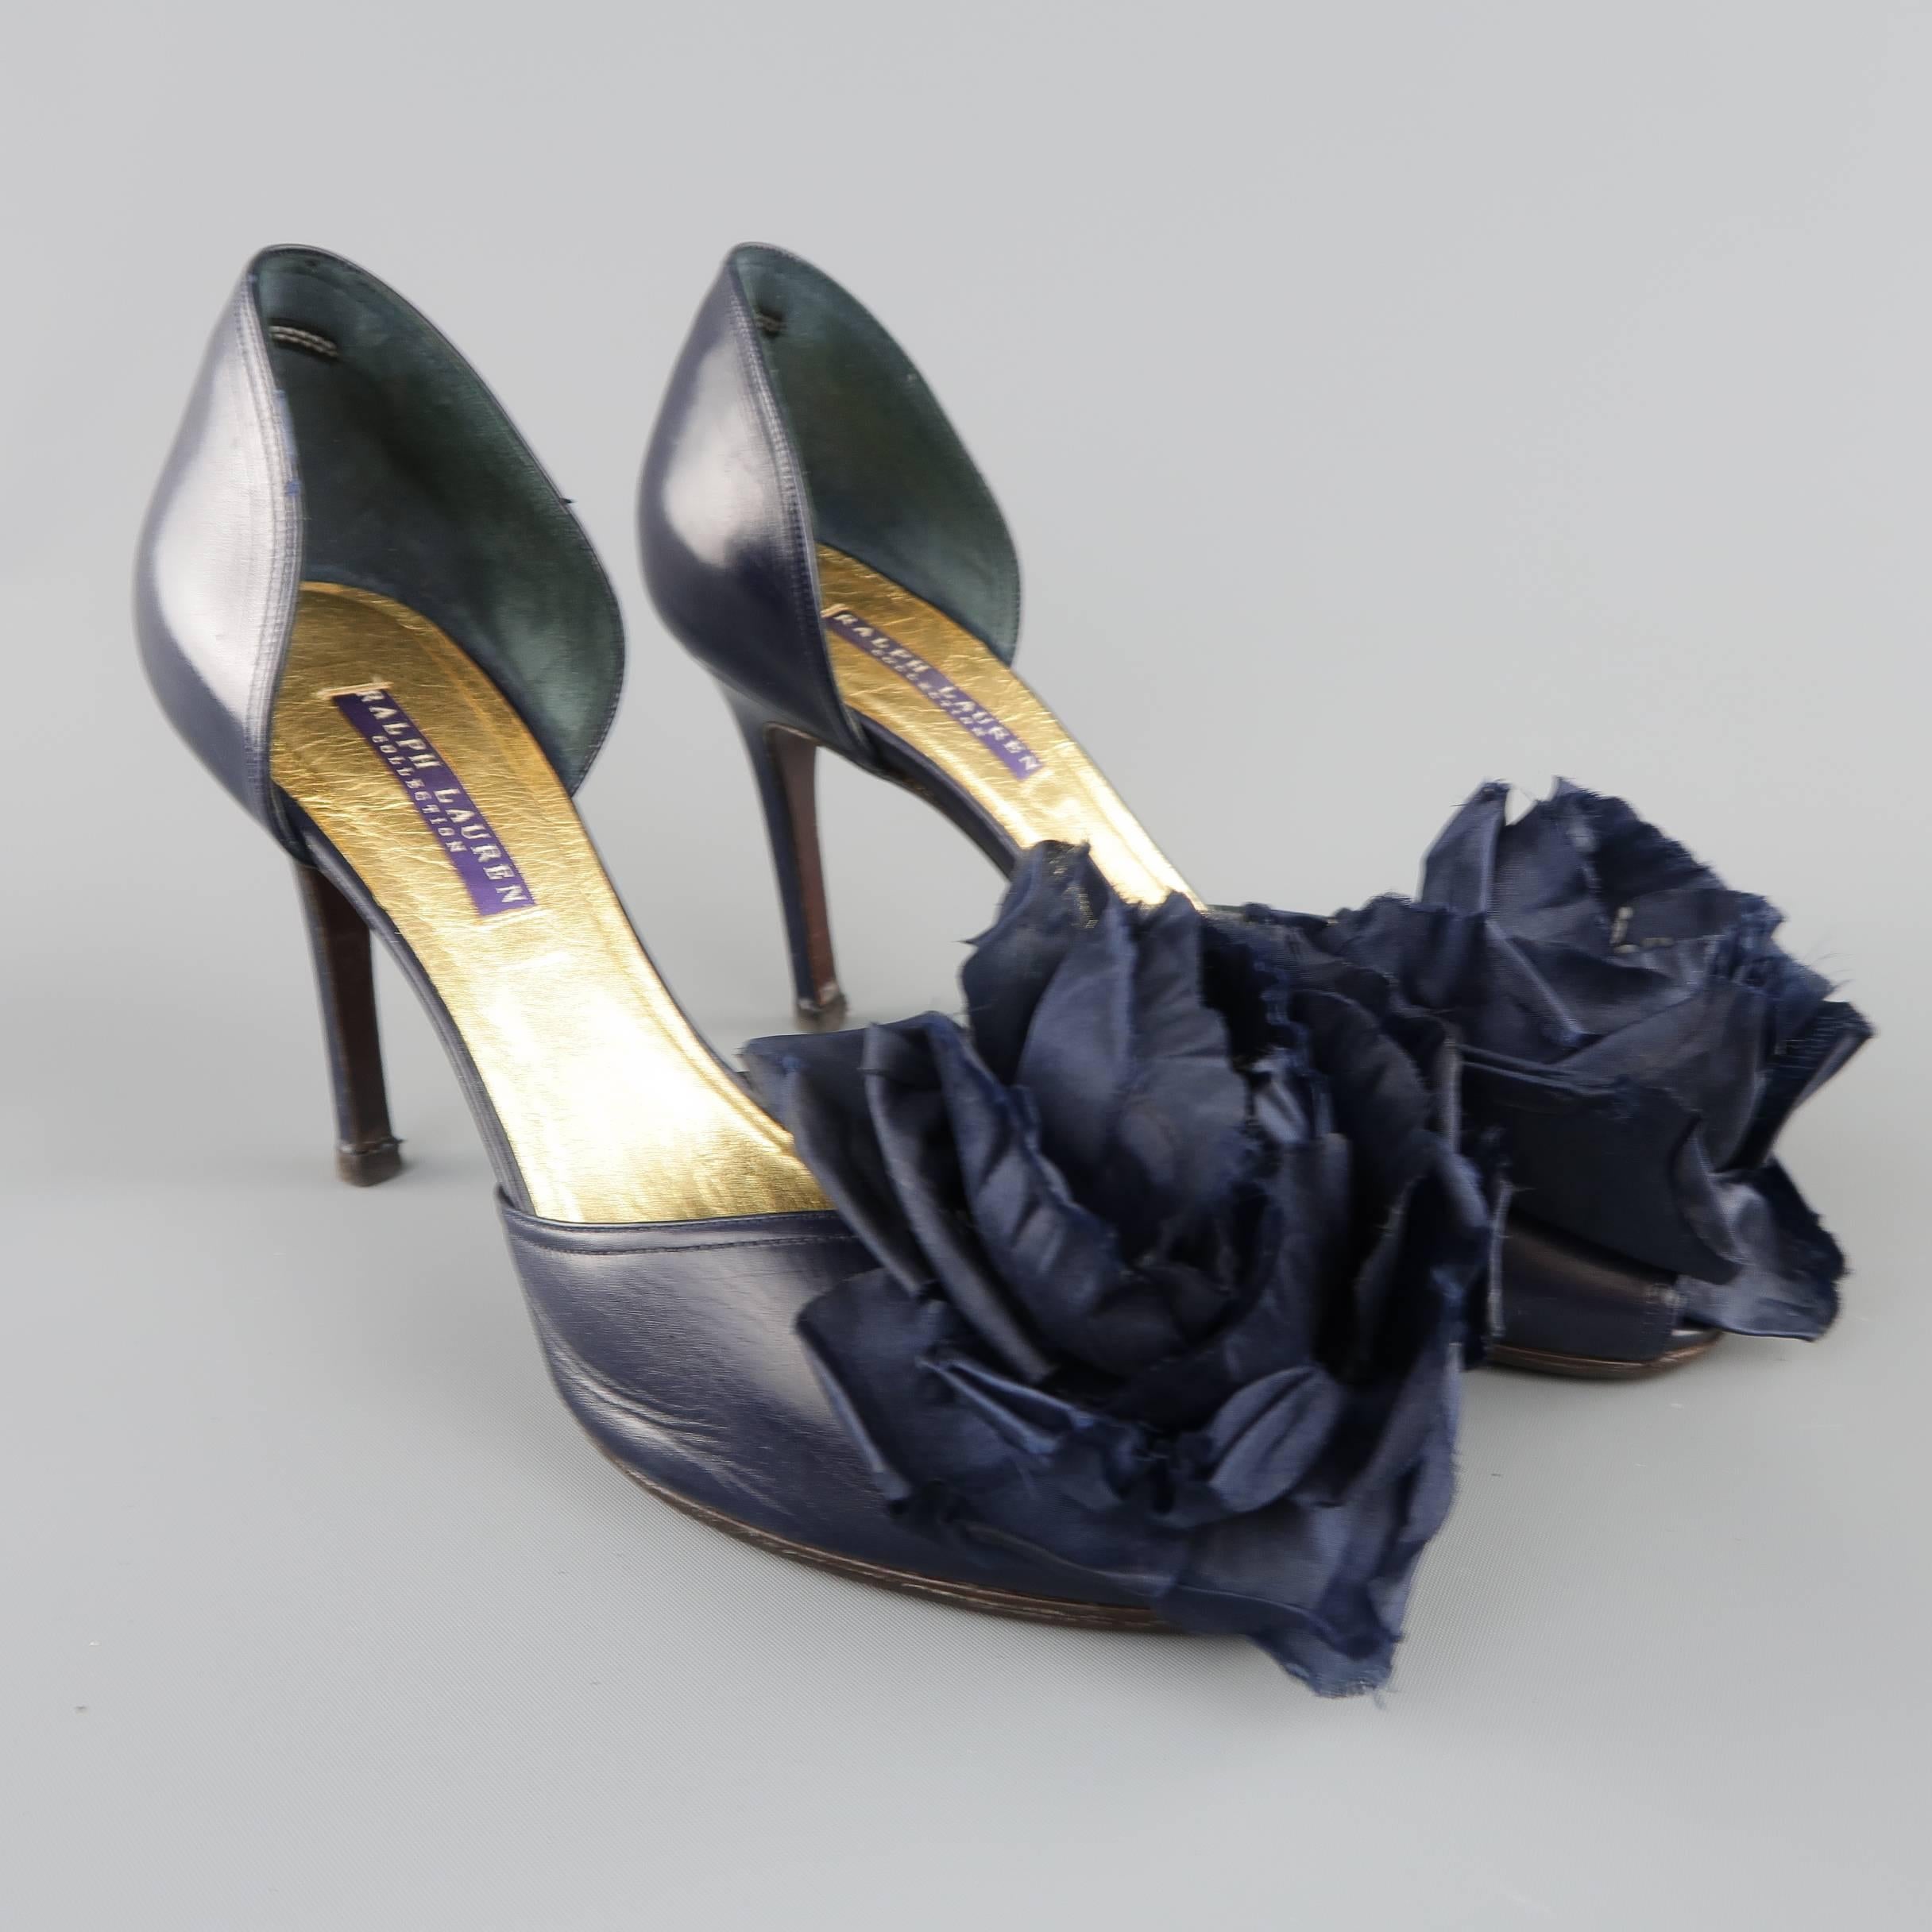 RALPH LAUREN COLLECTION D'orsay pumps come in navy blue leather and feature a peep toe, covered stiletto heel, and oversized flower adornment. Made in Italy.
 
Good Pre-Owned Condition.
Marked: 8 1/2 B
 
Heel: 3.75 in.

SKU: 84907